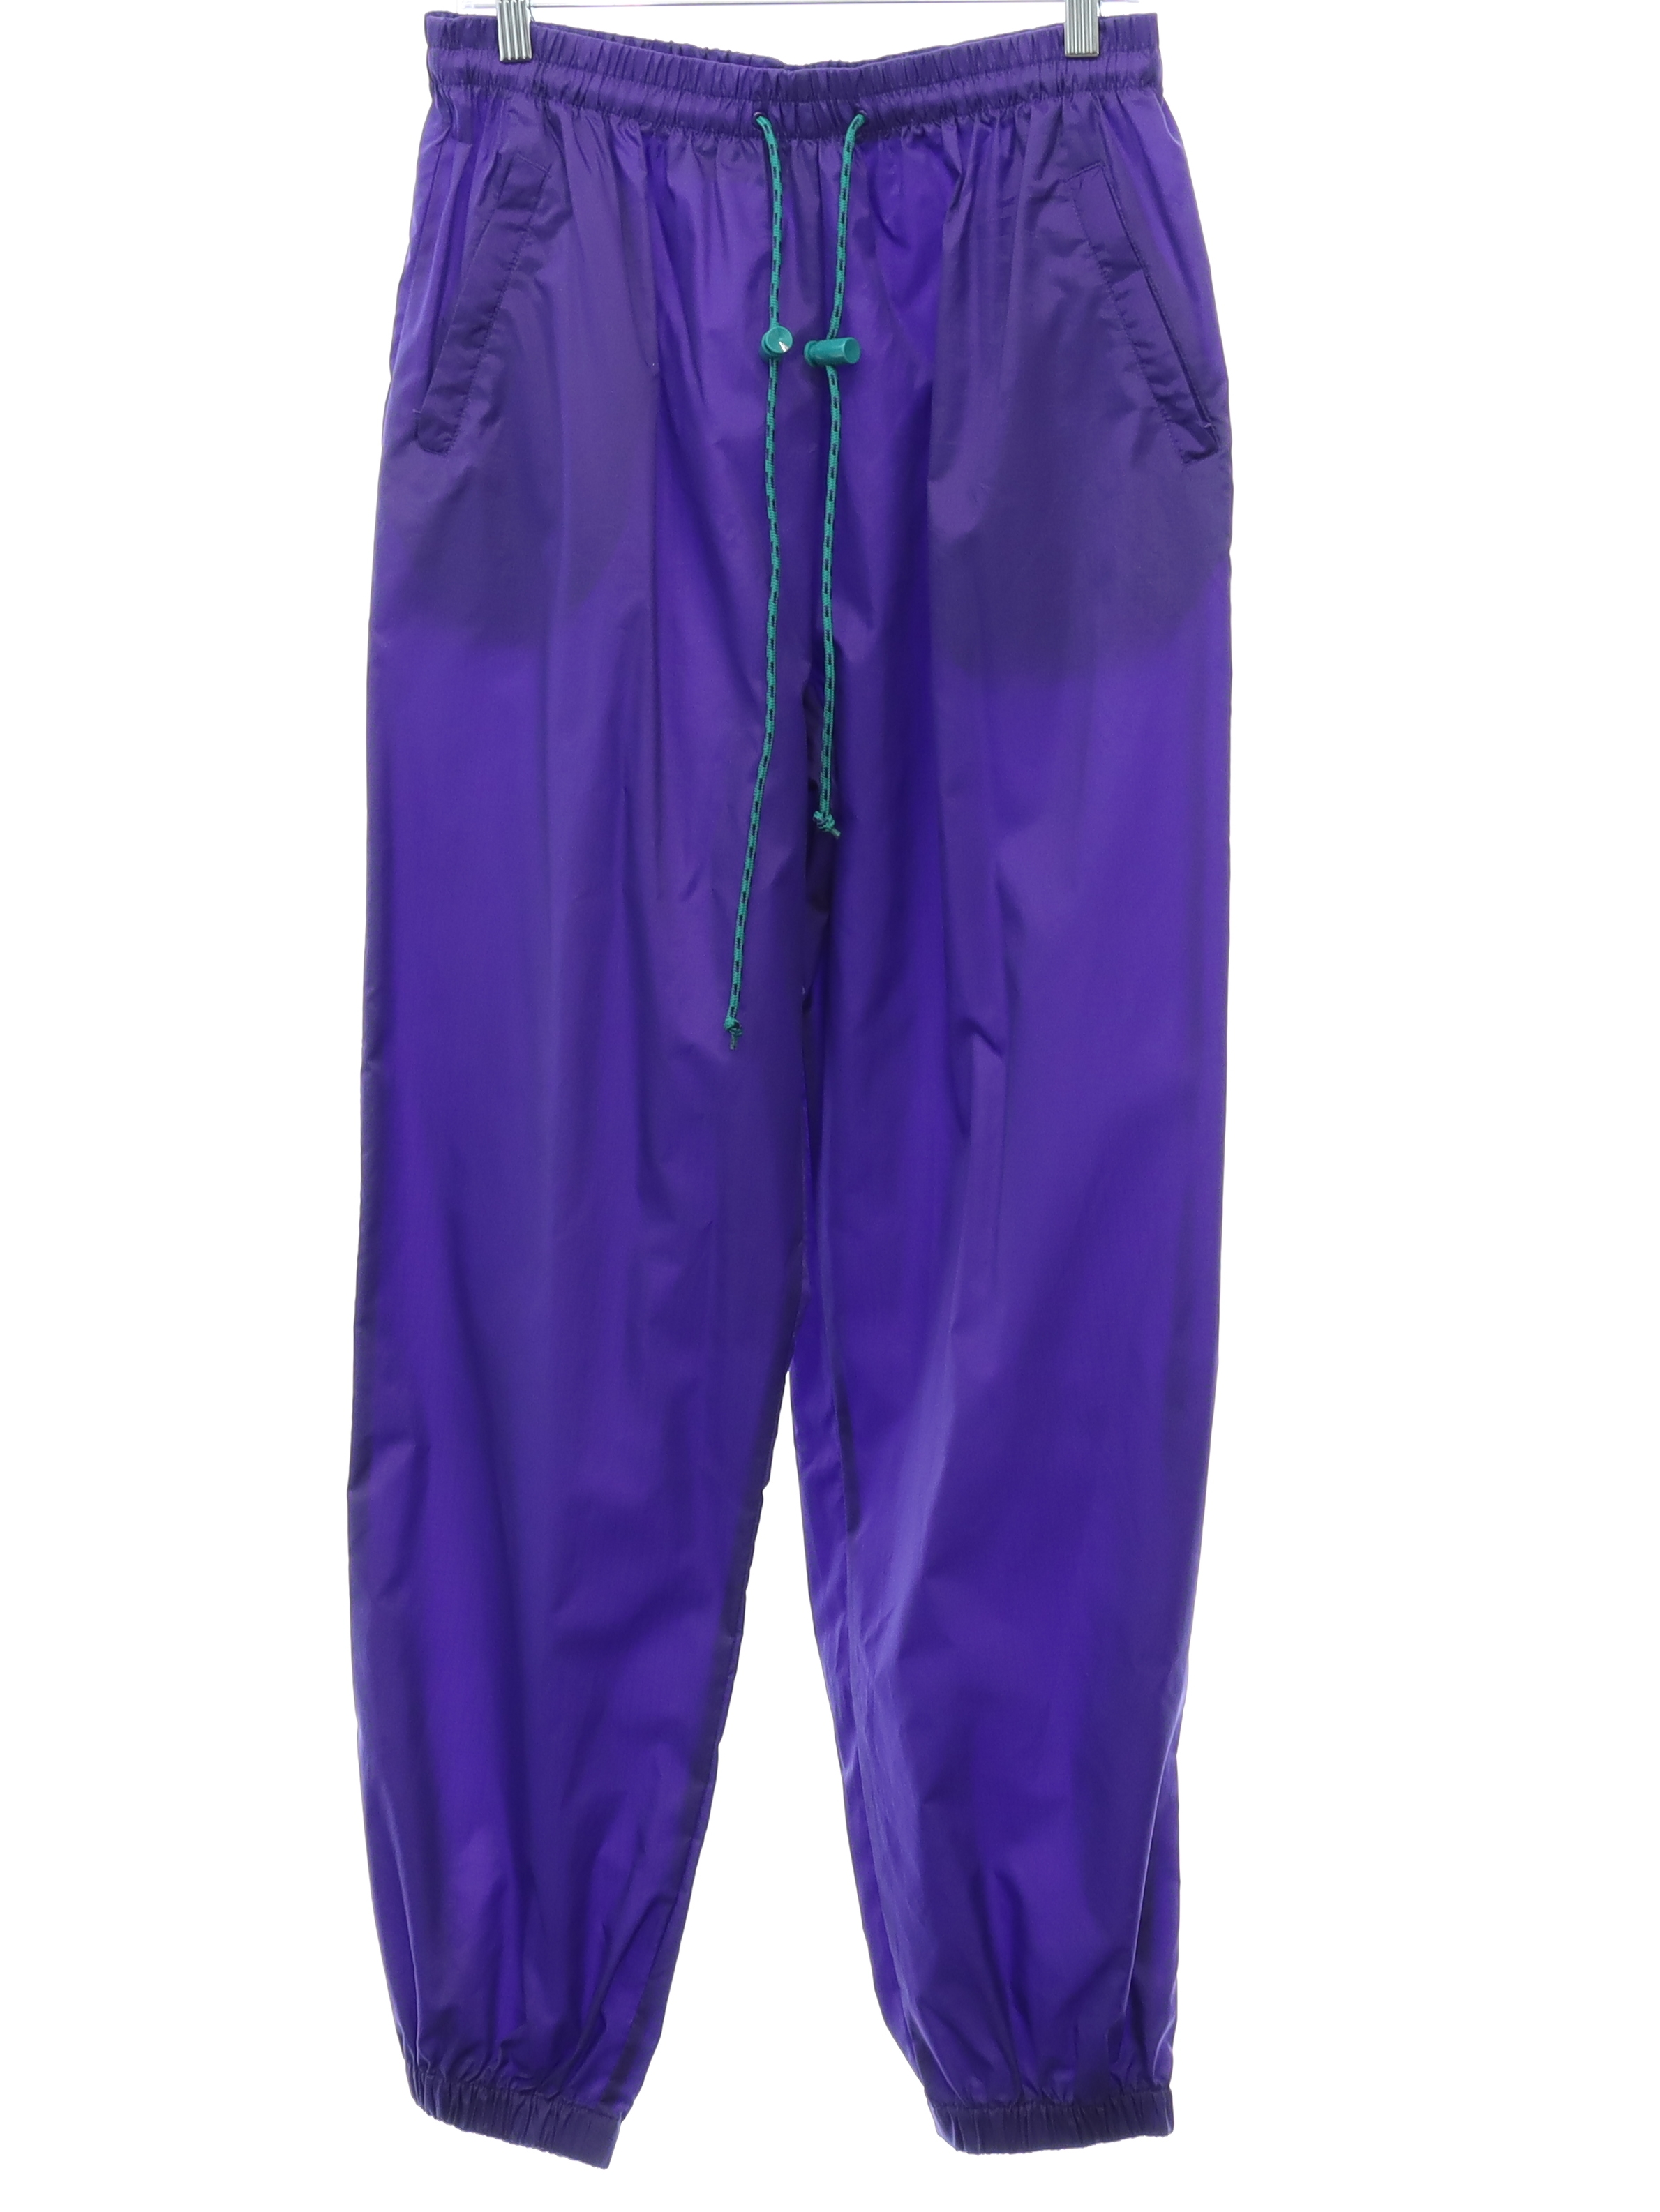 Vintage 1980's Pants: 80s style (made in 90s) -Northern Reflections- Womens  purple solid colored nylon shell flat front track or jogging pants with  elastic cuff hem, tapered legs, elastic waistline with outside